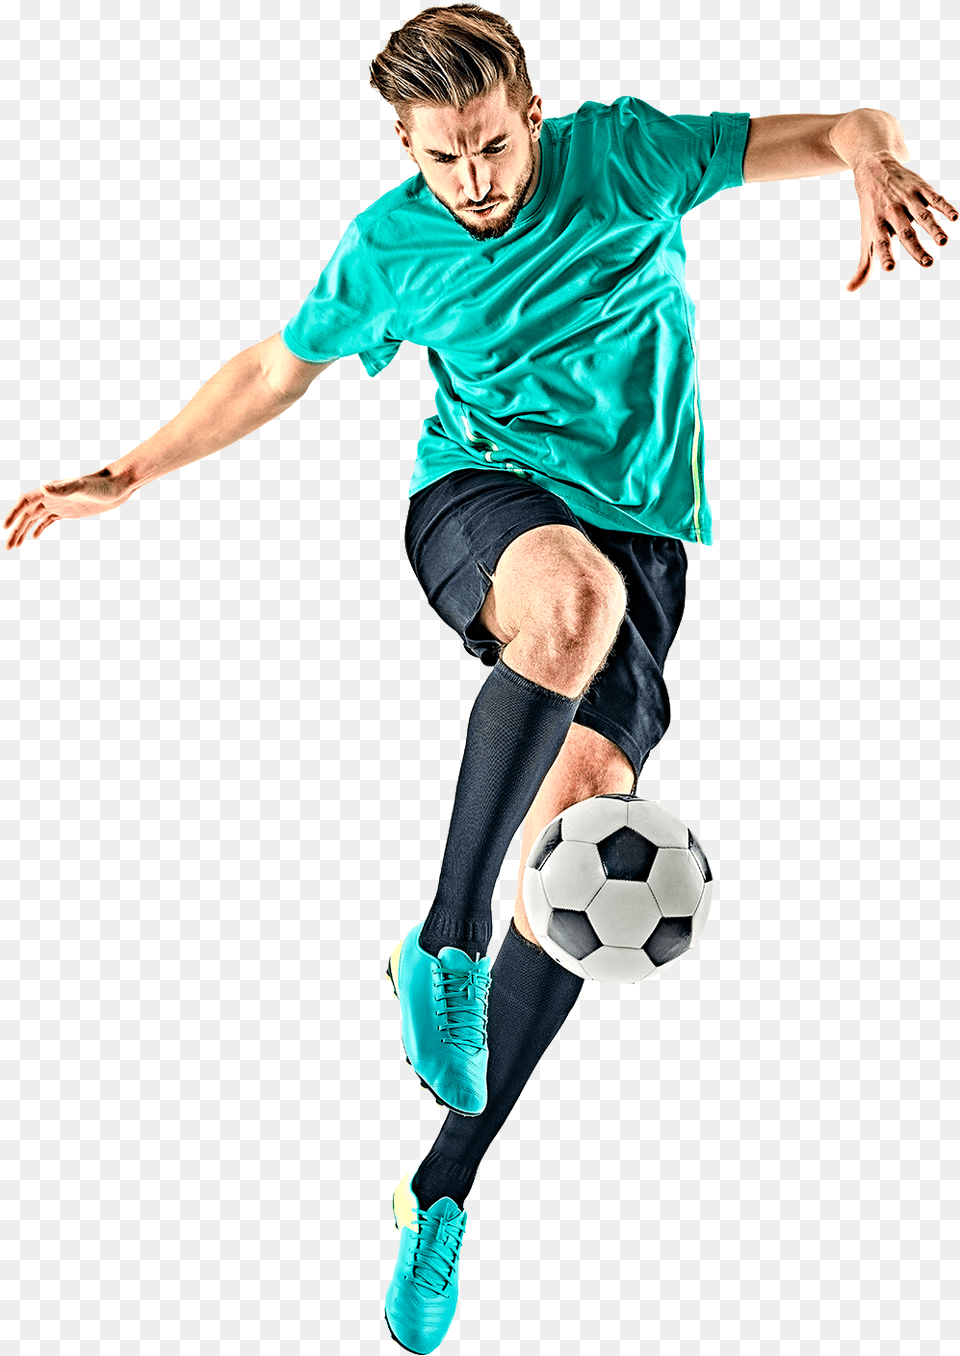 Football Player Epson Surecolor, Ball, Sport, Soccer Ball, Soccer Free Png Download